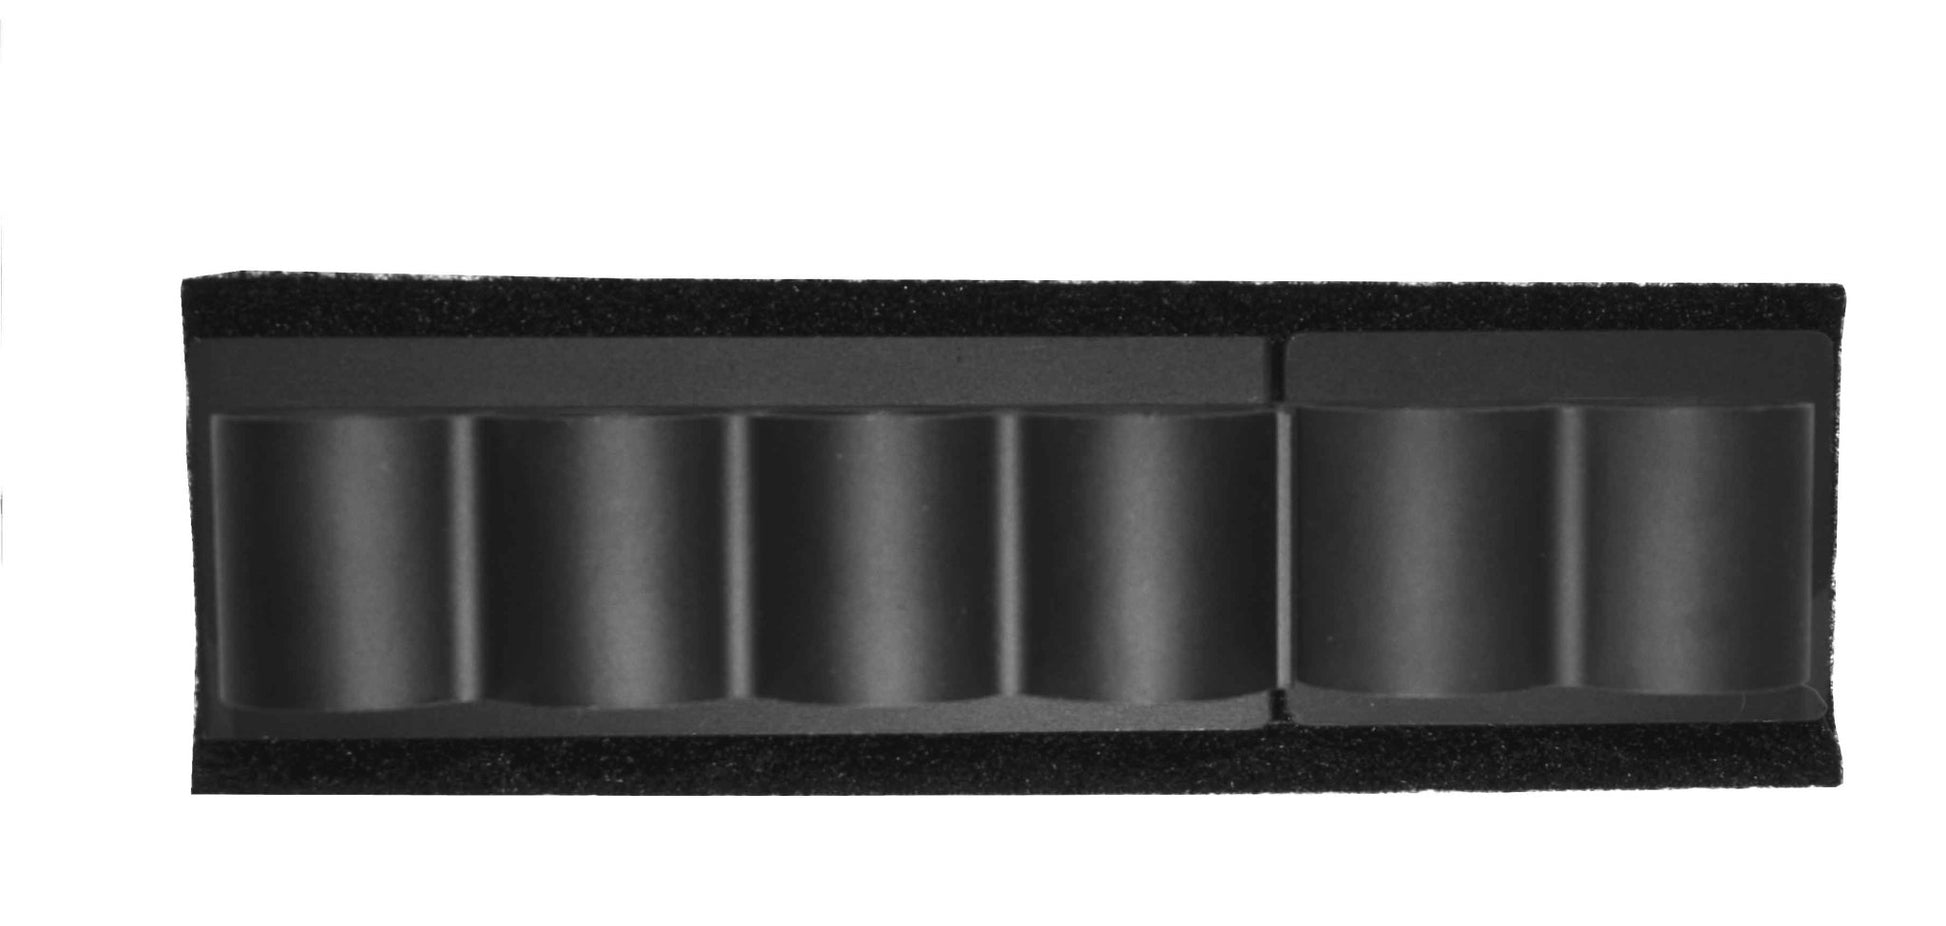 Trinity Shell Carrier Mossberg 930 6 Shell Holder Remington 870 Shot Shell Holder Ammo Pouch 12 Gauge Tactical Hunting… - TRINITY SUPPLY INC